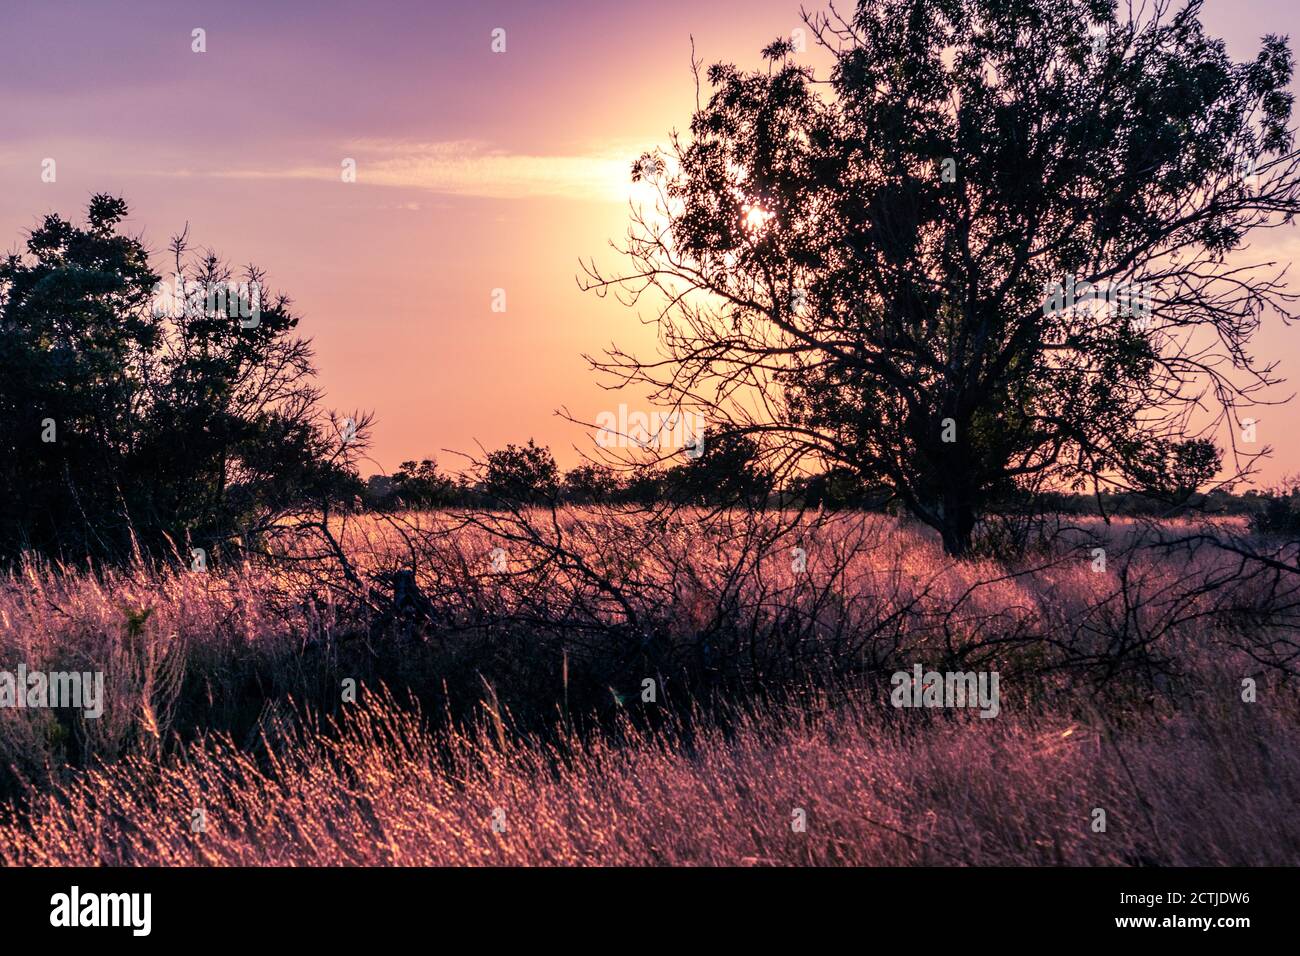 Sunset in rural area over the wild lawn with dry grass shining in sun rays and dark trees silhouette in purple vibrant warm autumnal vivid colors Stock Photo